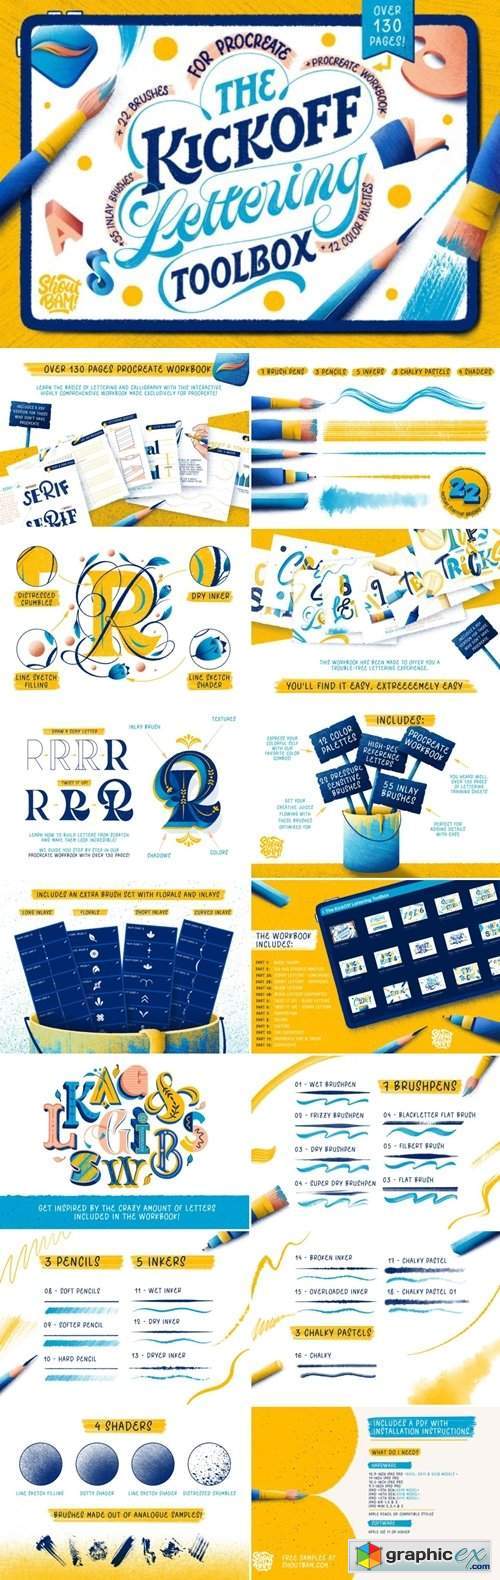 The KickOff Lettering Toolbox